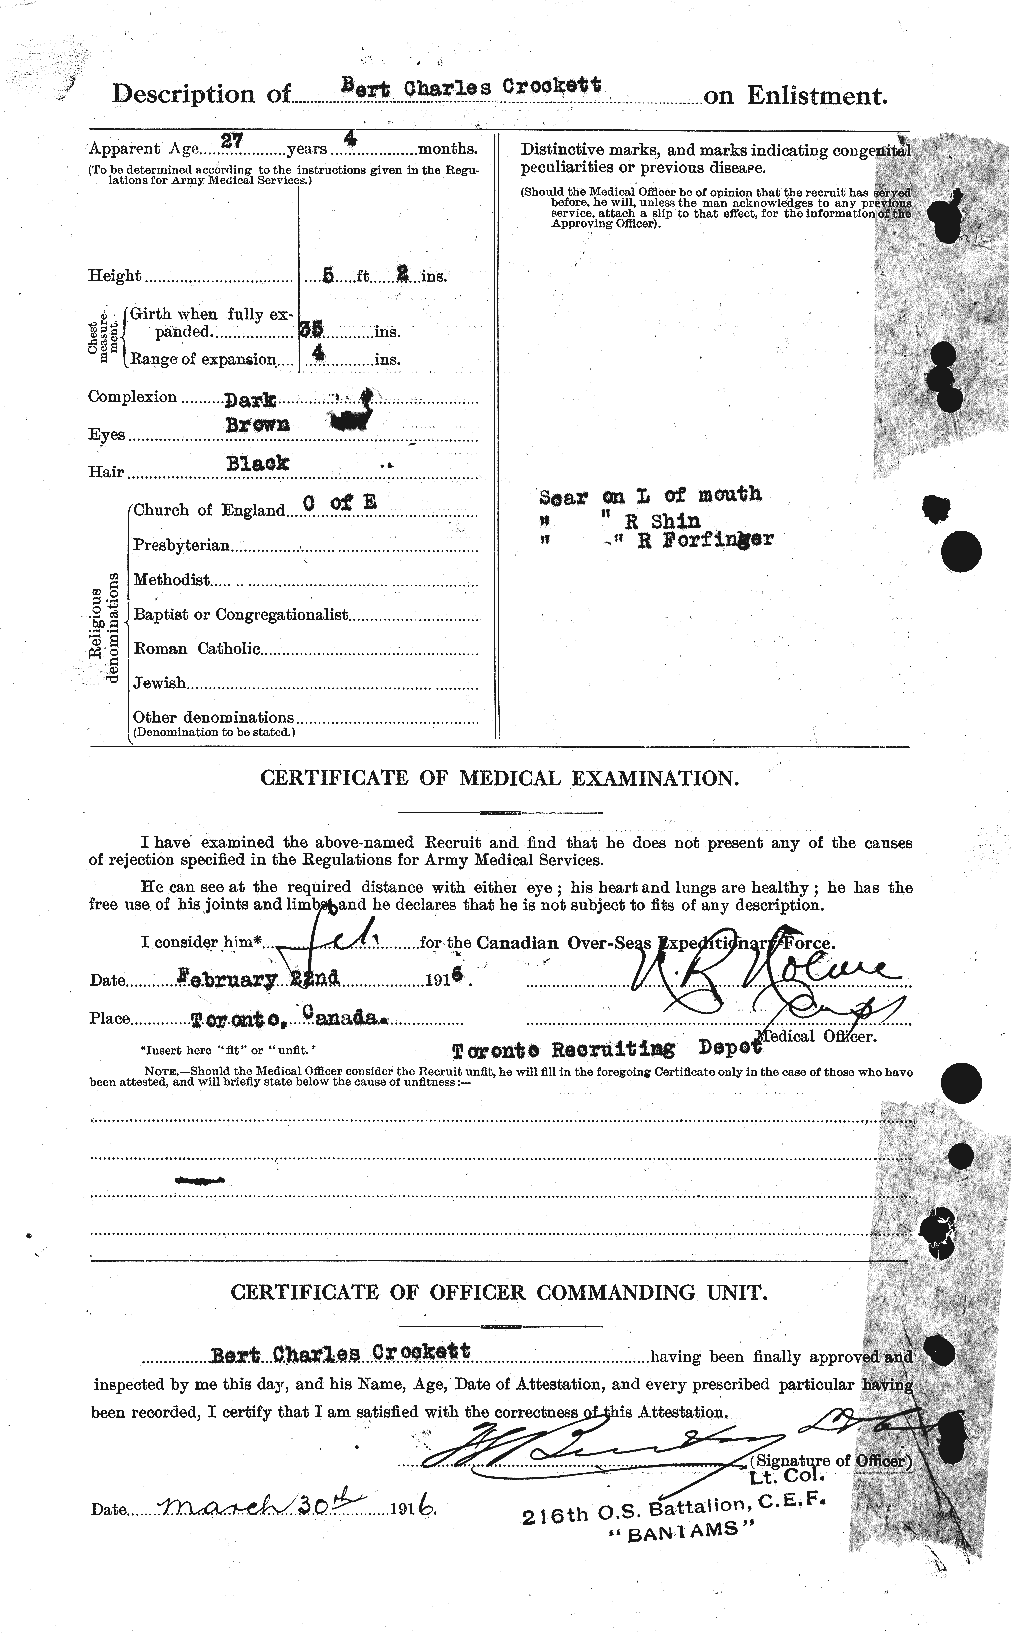 Personnel Records of the First World War - CEF 064723b